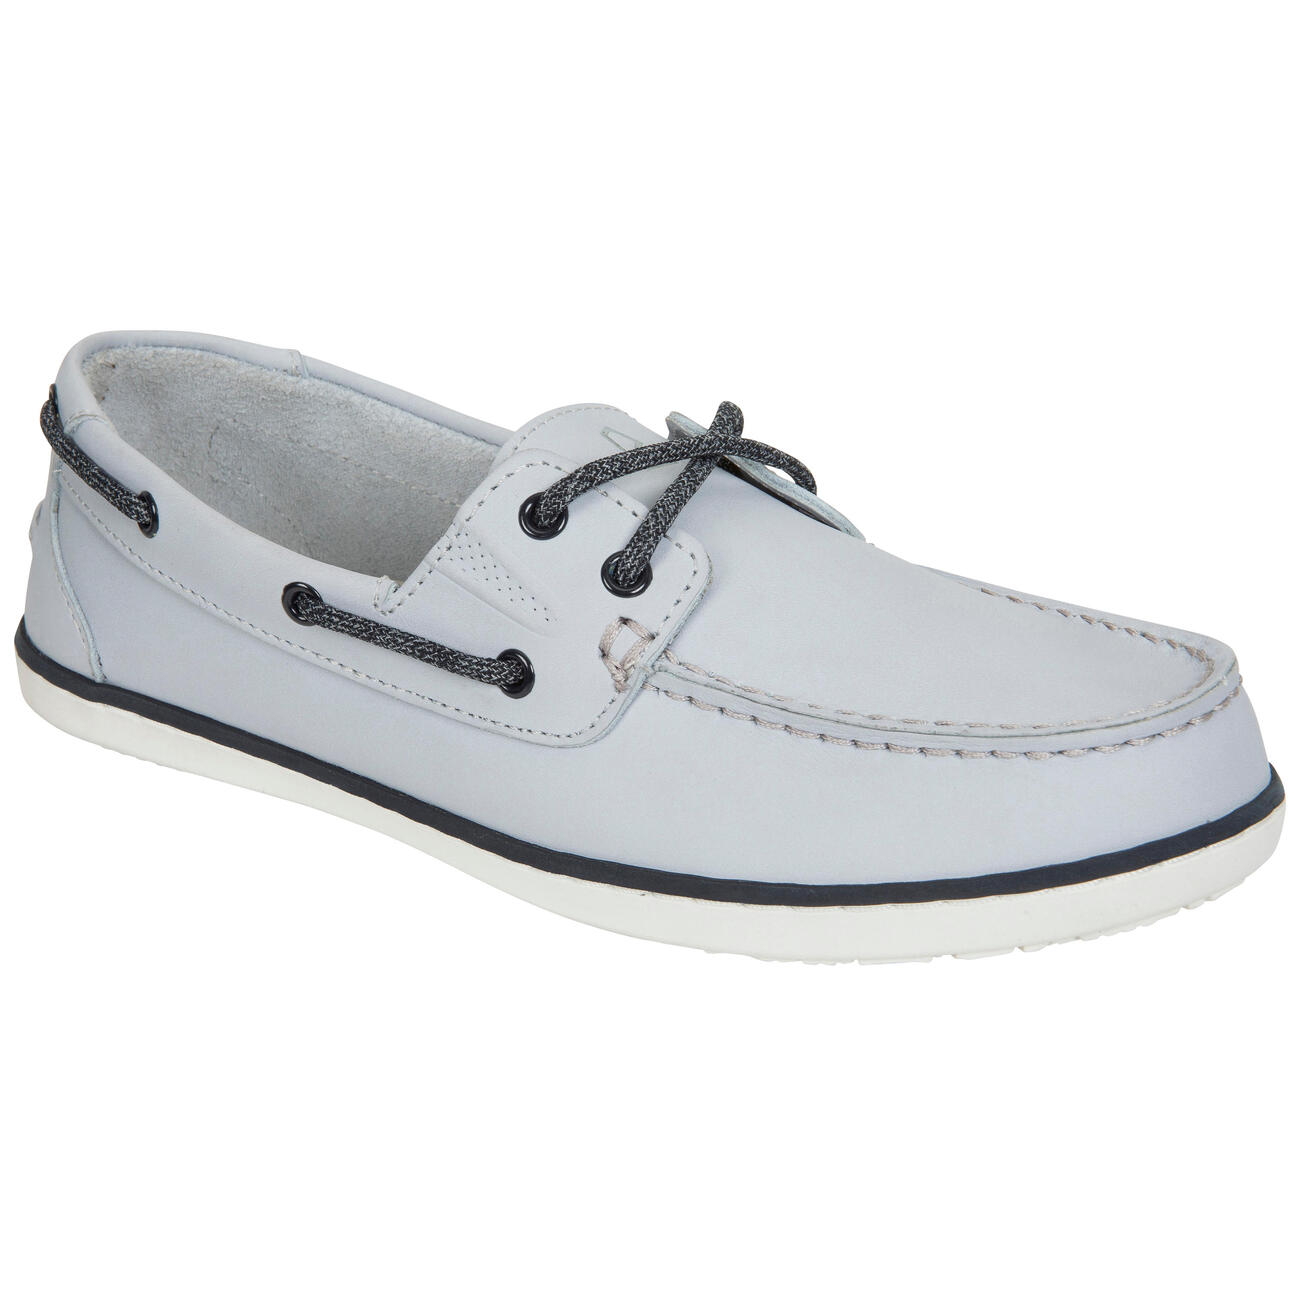 Women’s Leather Sailing Boat Shoes 500 Tribord - Decathlon